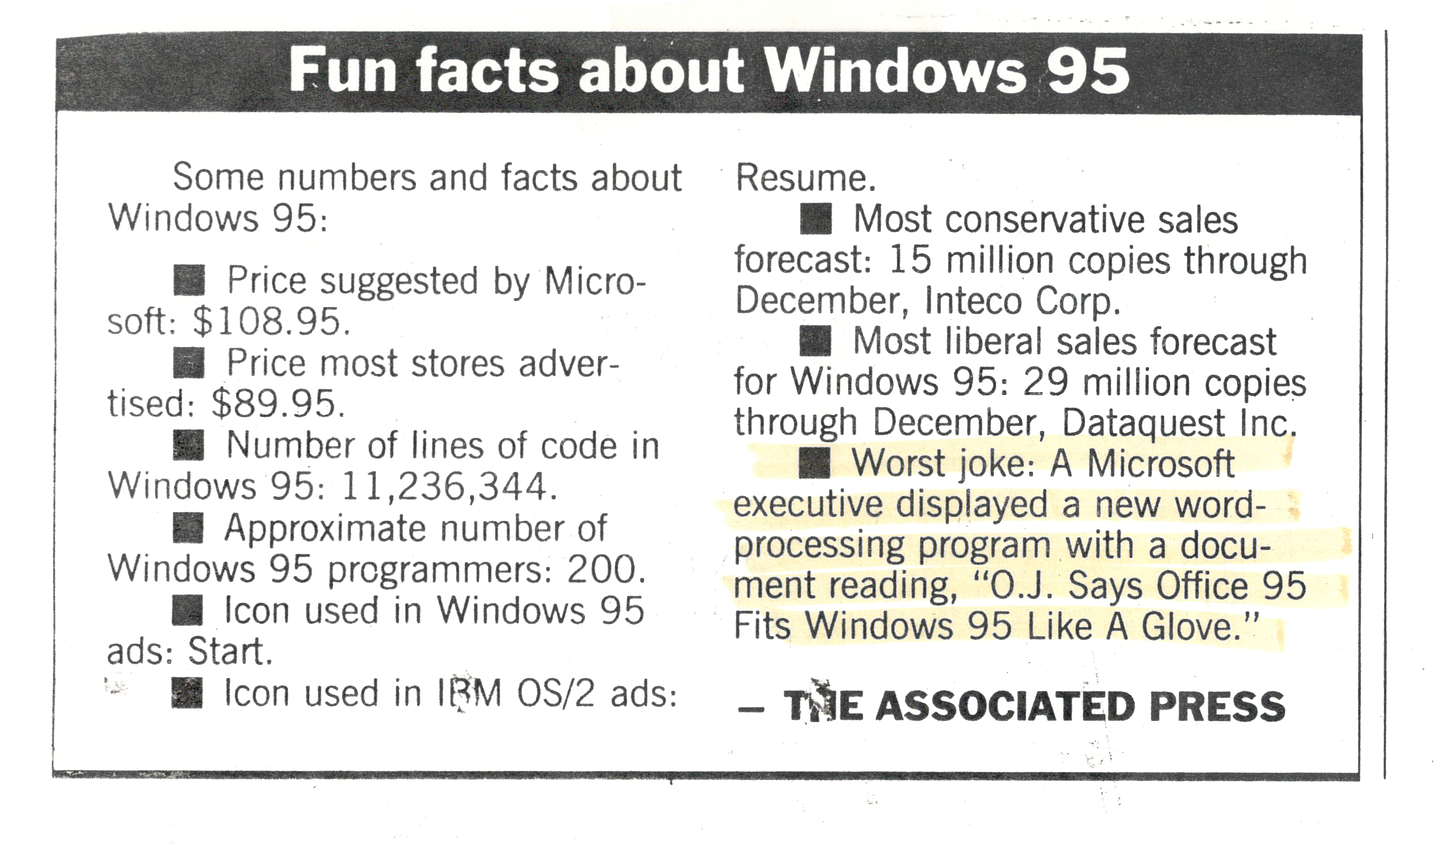 Fun Facts about Windows 95 newspaper clipping from USA Today